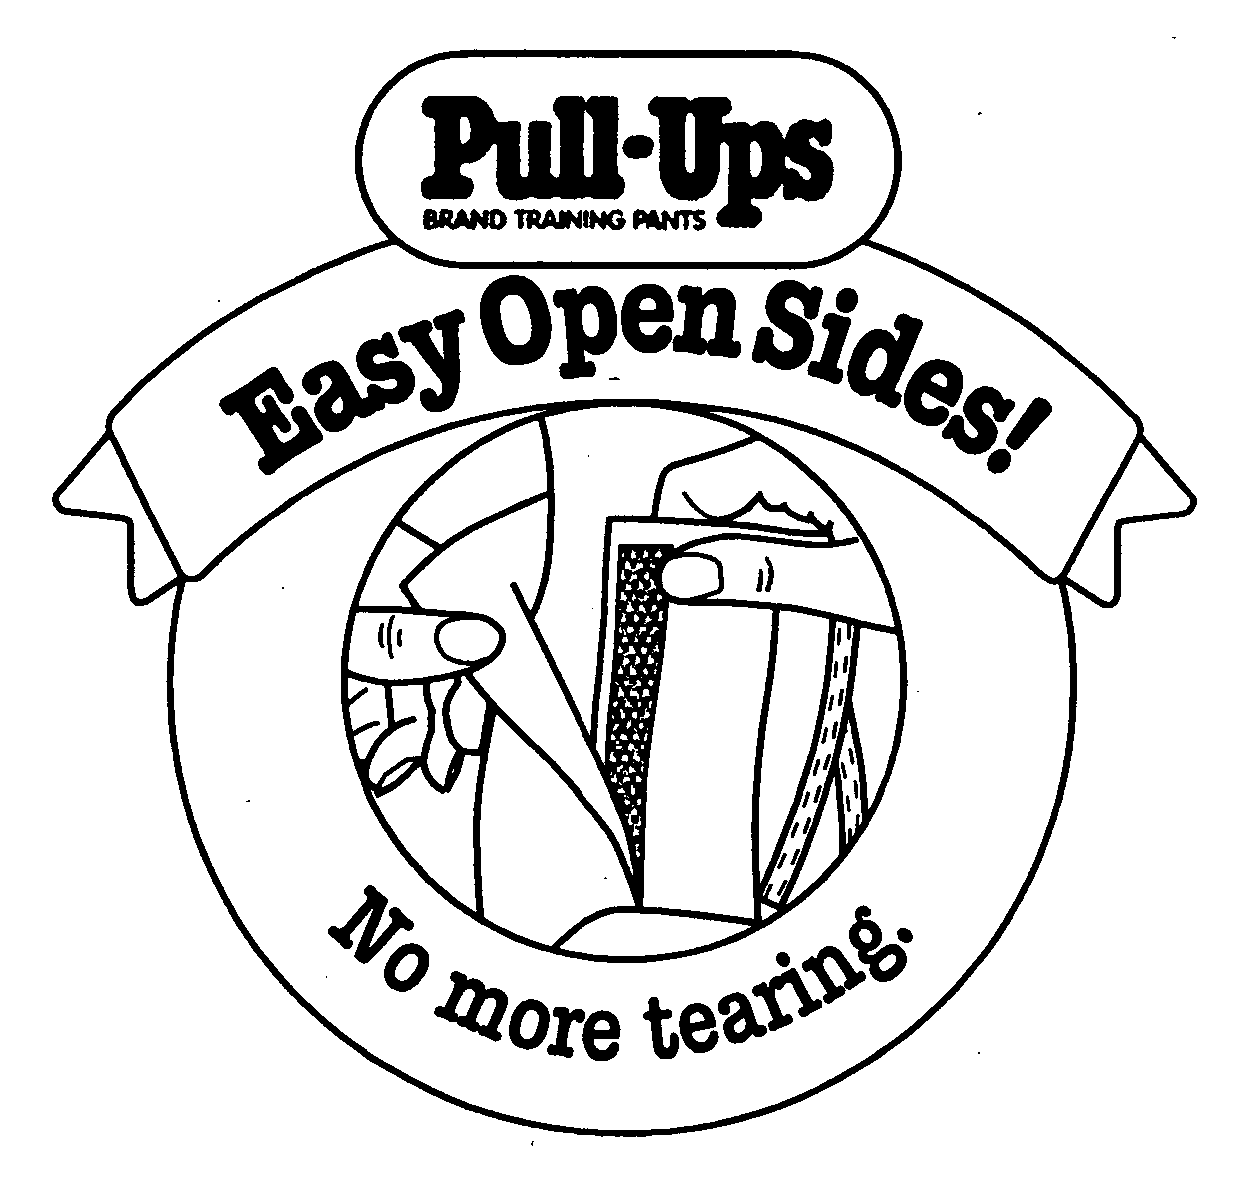  PULL-UPS BRAND TRAINING PANTS EASY OPEN SIDES! NO MORE TEARING.